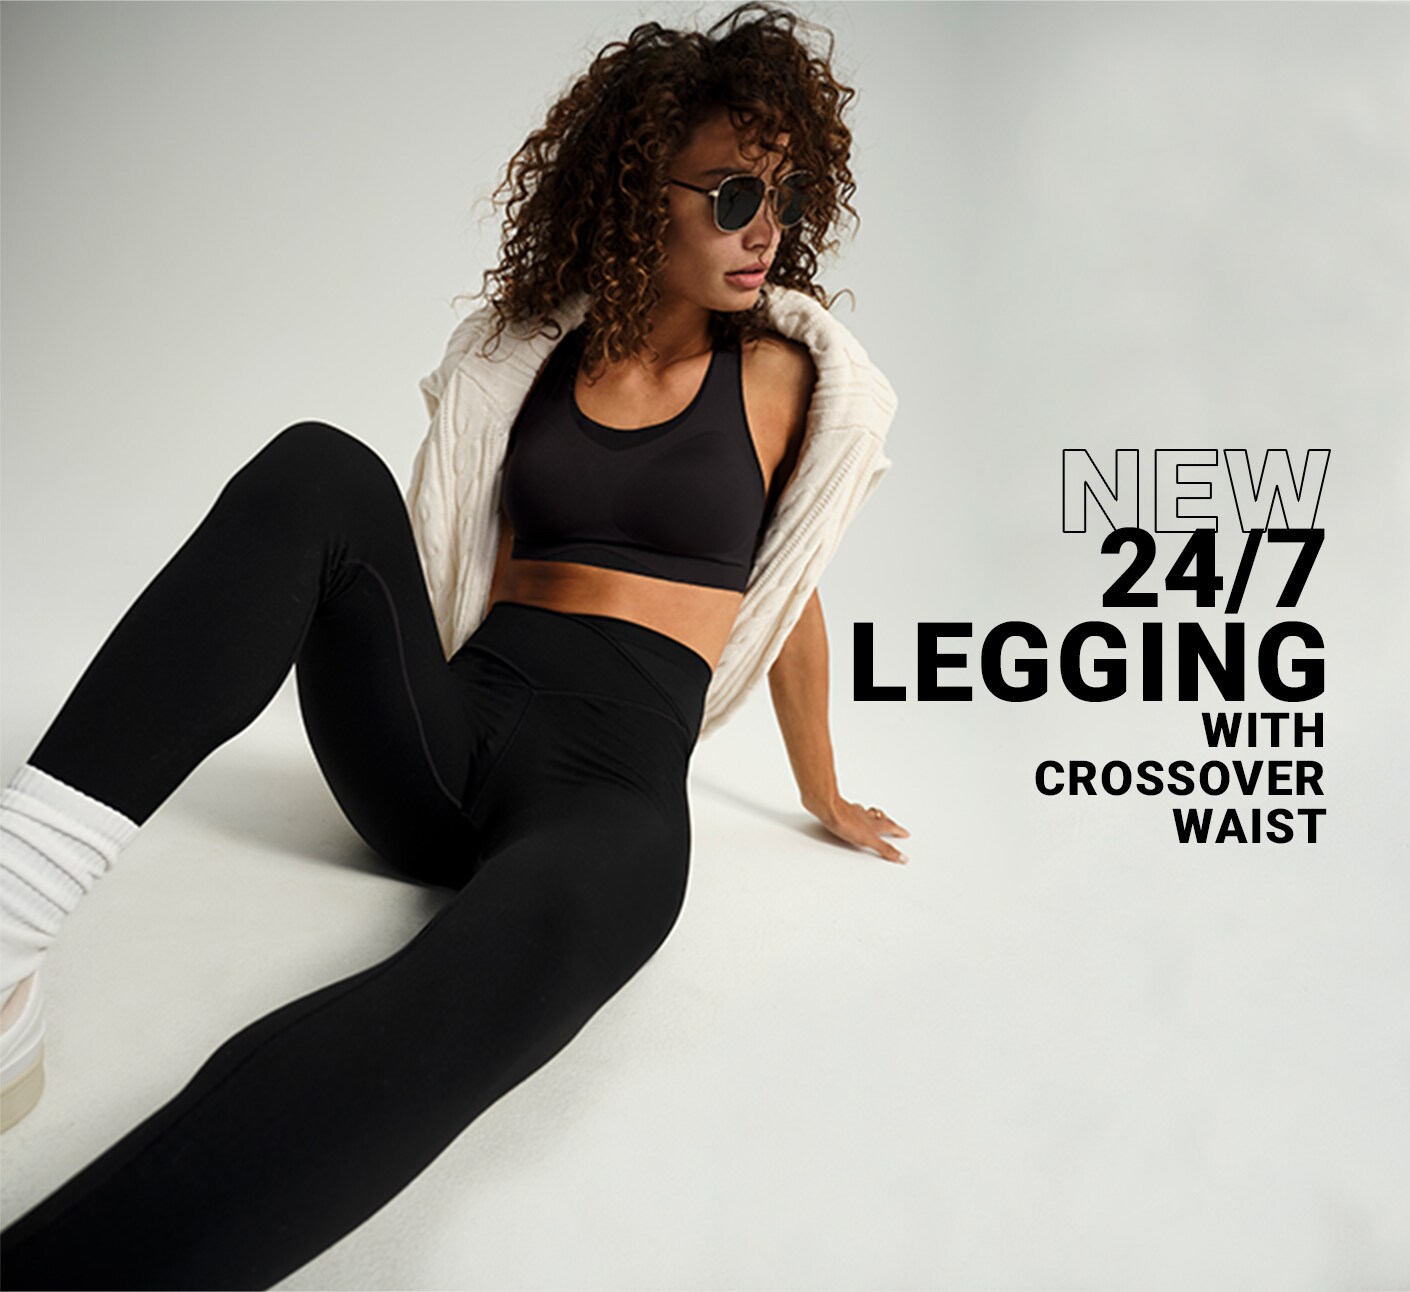 New 24/7 legging with crossover waist